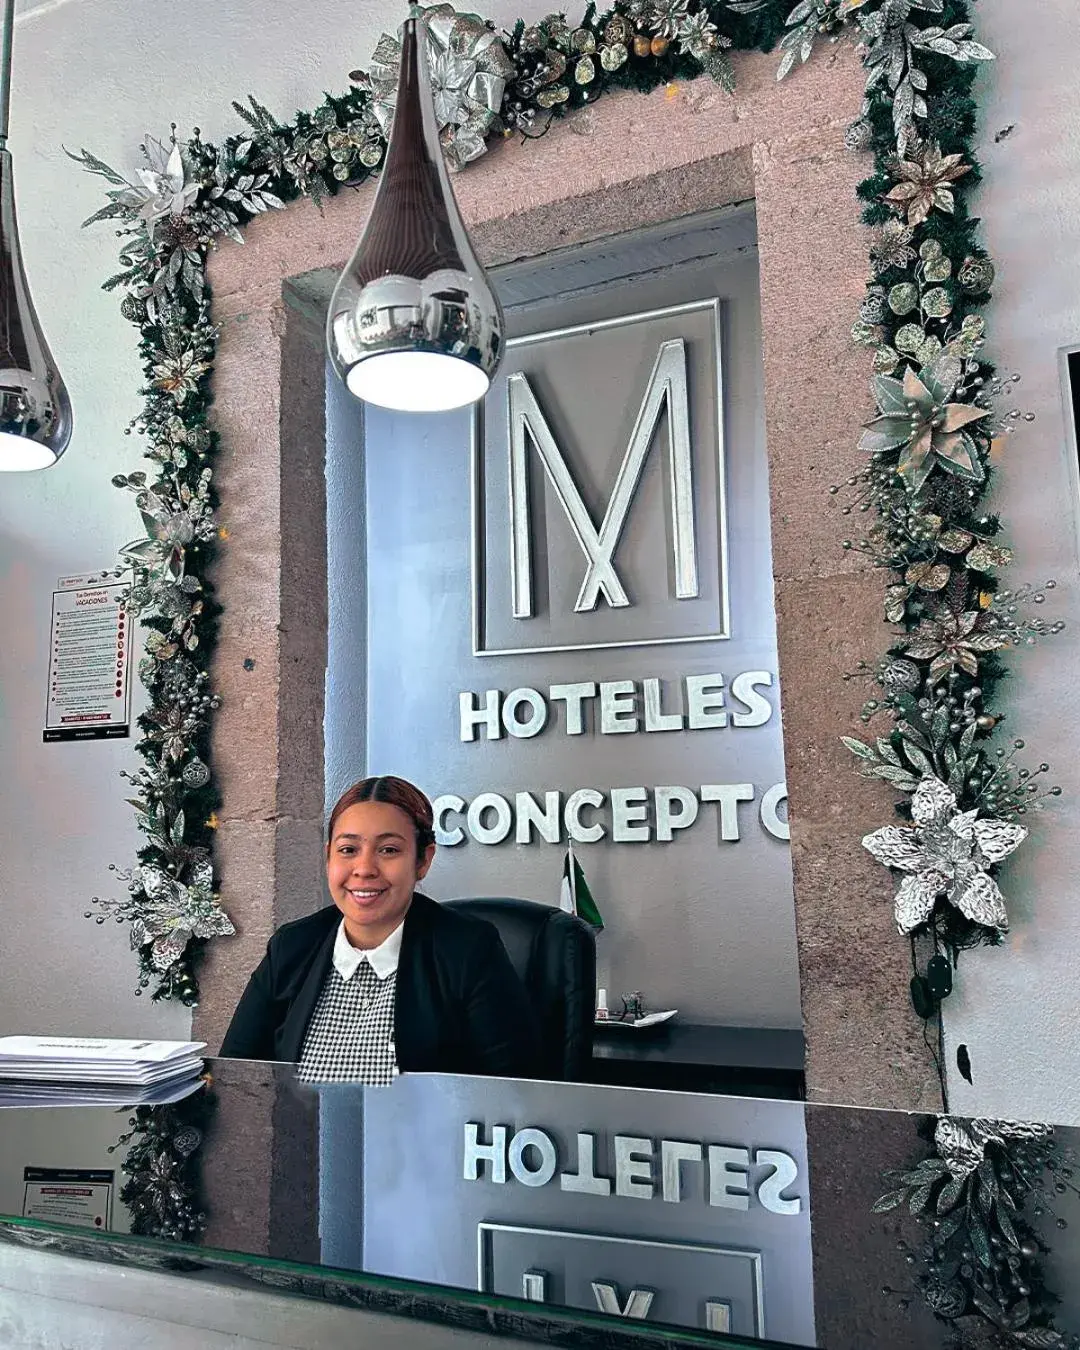 Property building in M Hoteles Concepto